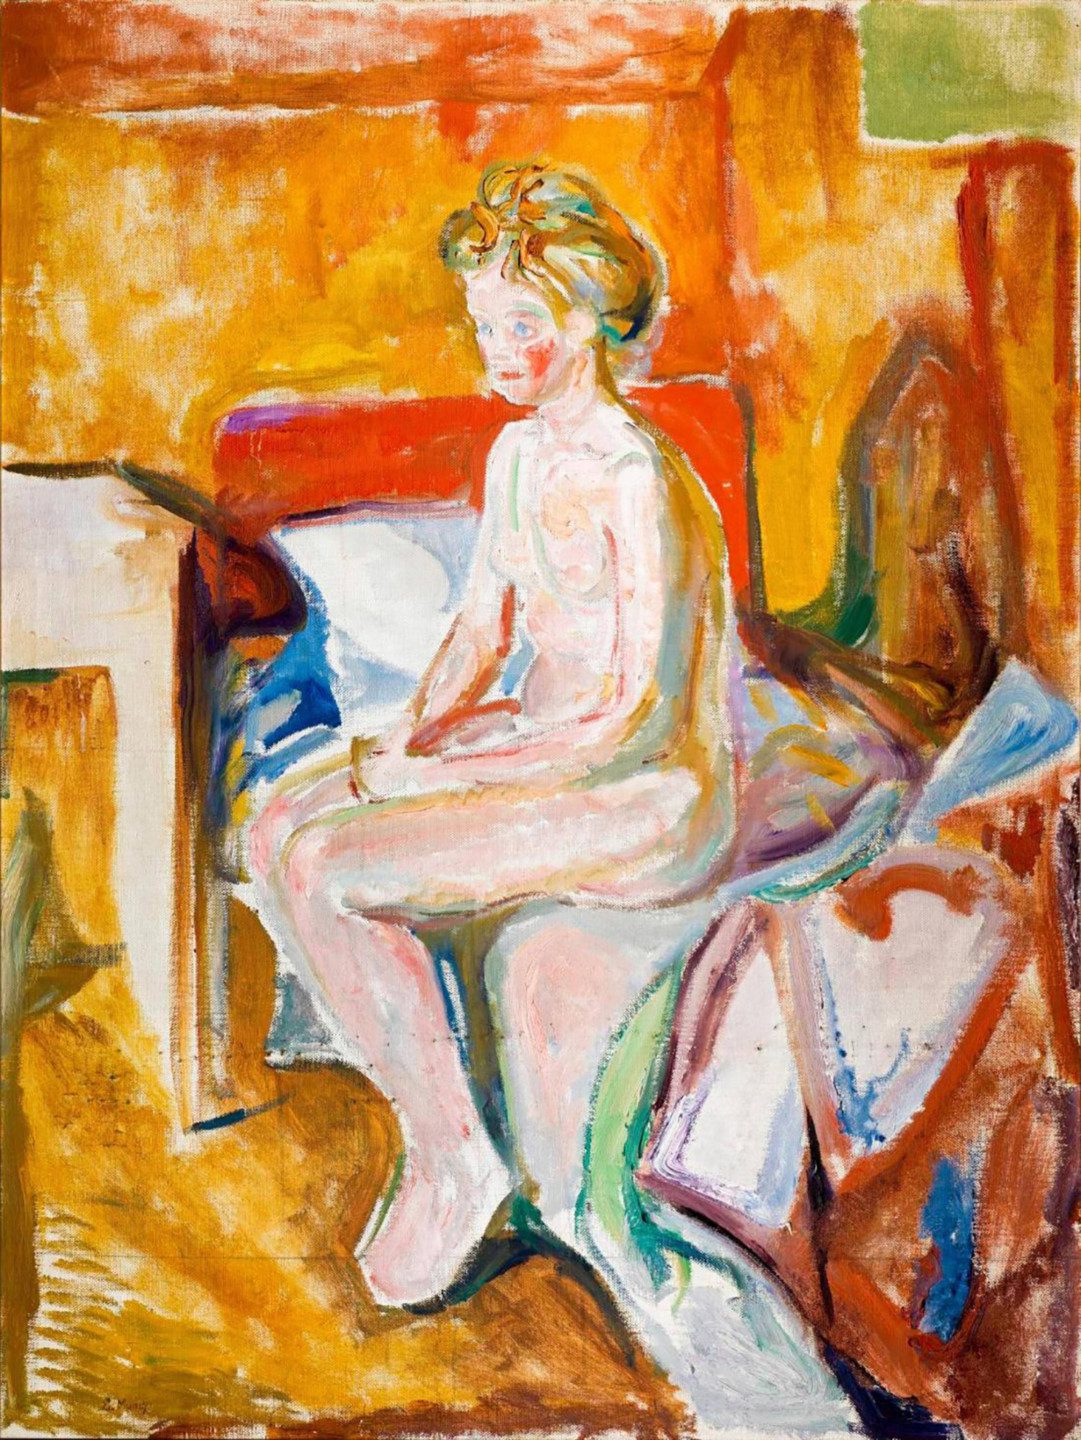 A painting of a woman sitting nsked on the side of her bed. The room is bright yellow. 